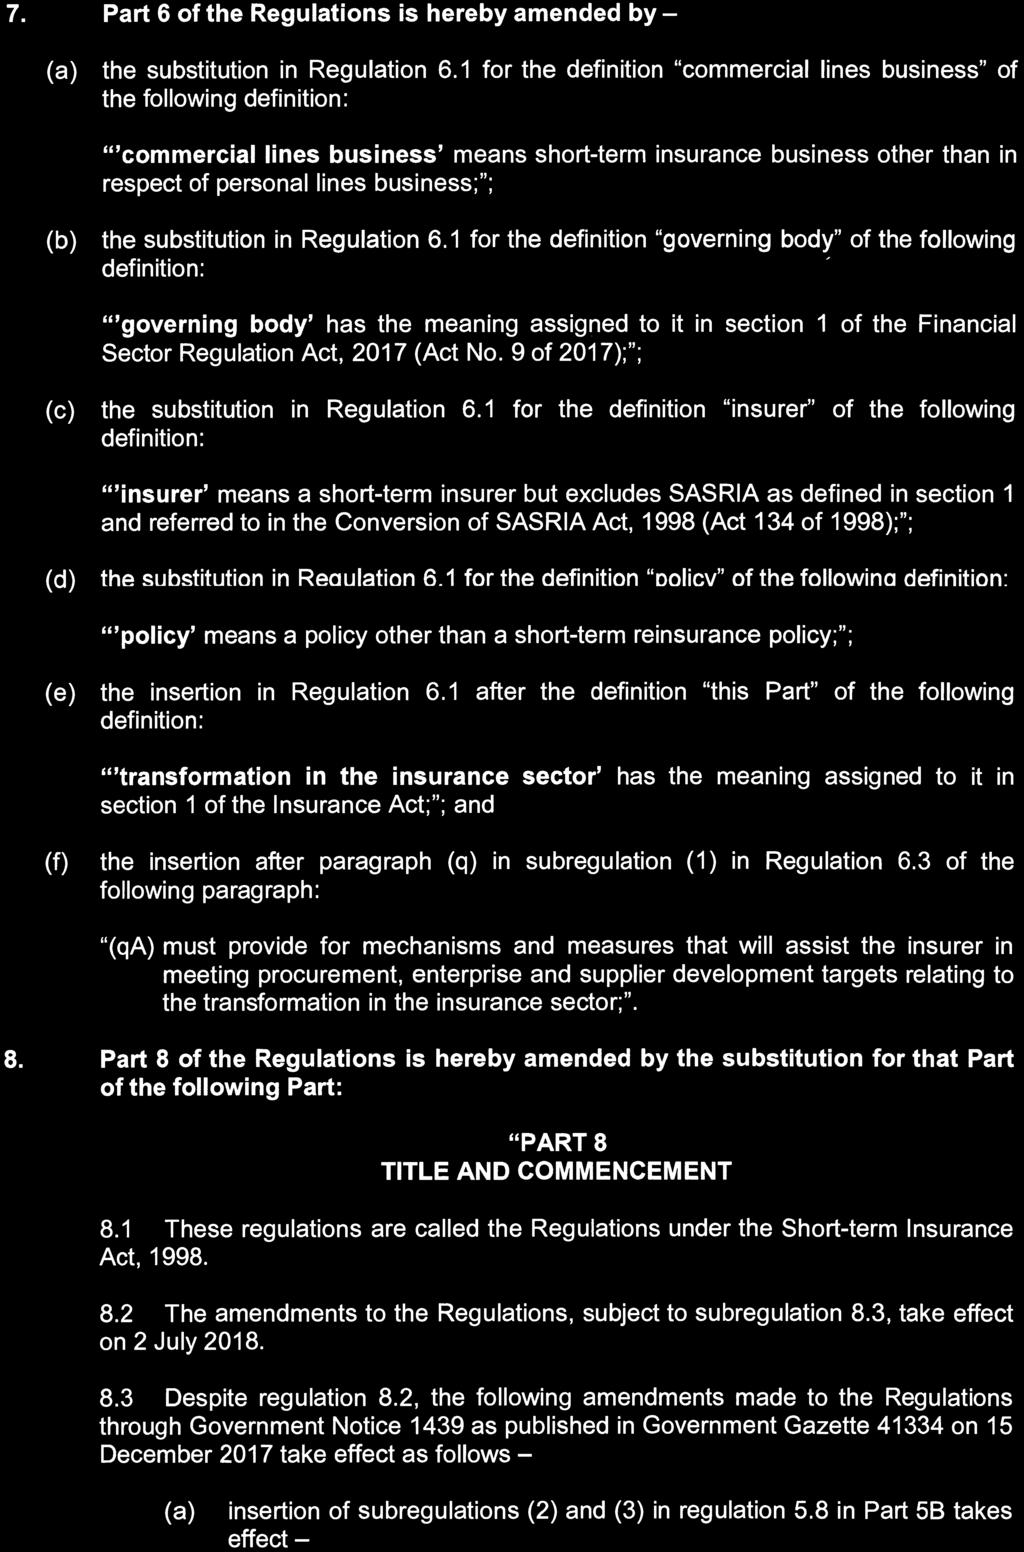 10 No. 41523 GOVERNMENT GAZETTE, 23 MARCH 2018 7. Part 6 of the Regulations is hereby amended by - the substitution in Regulation 6.